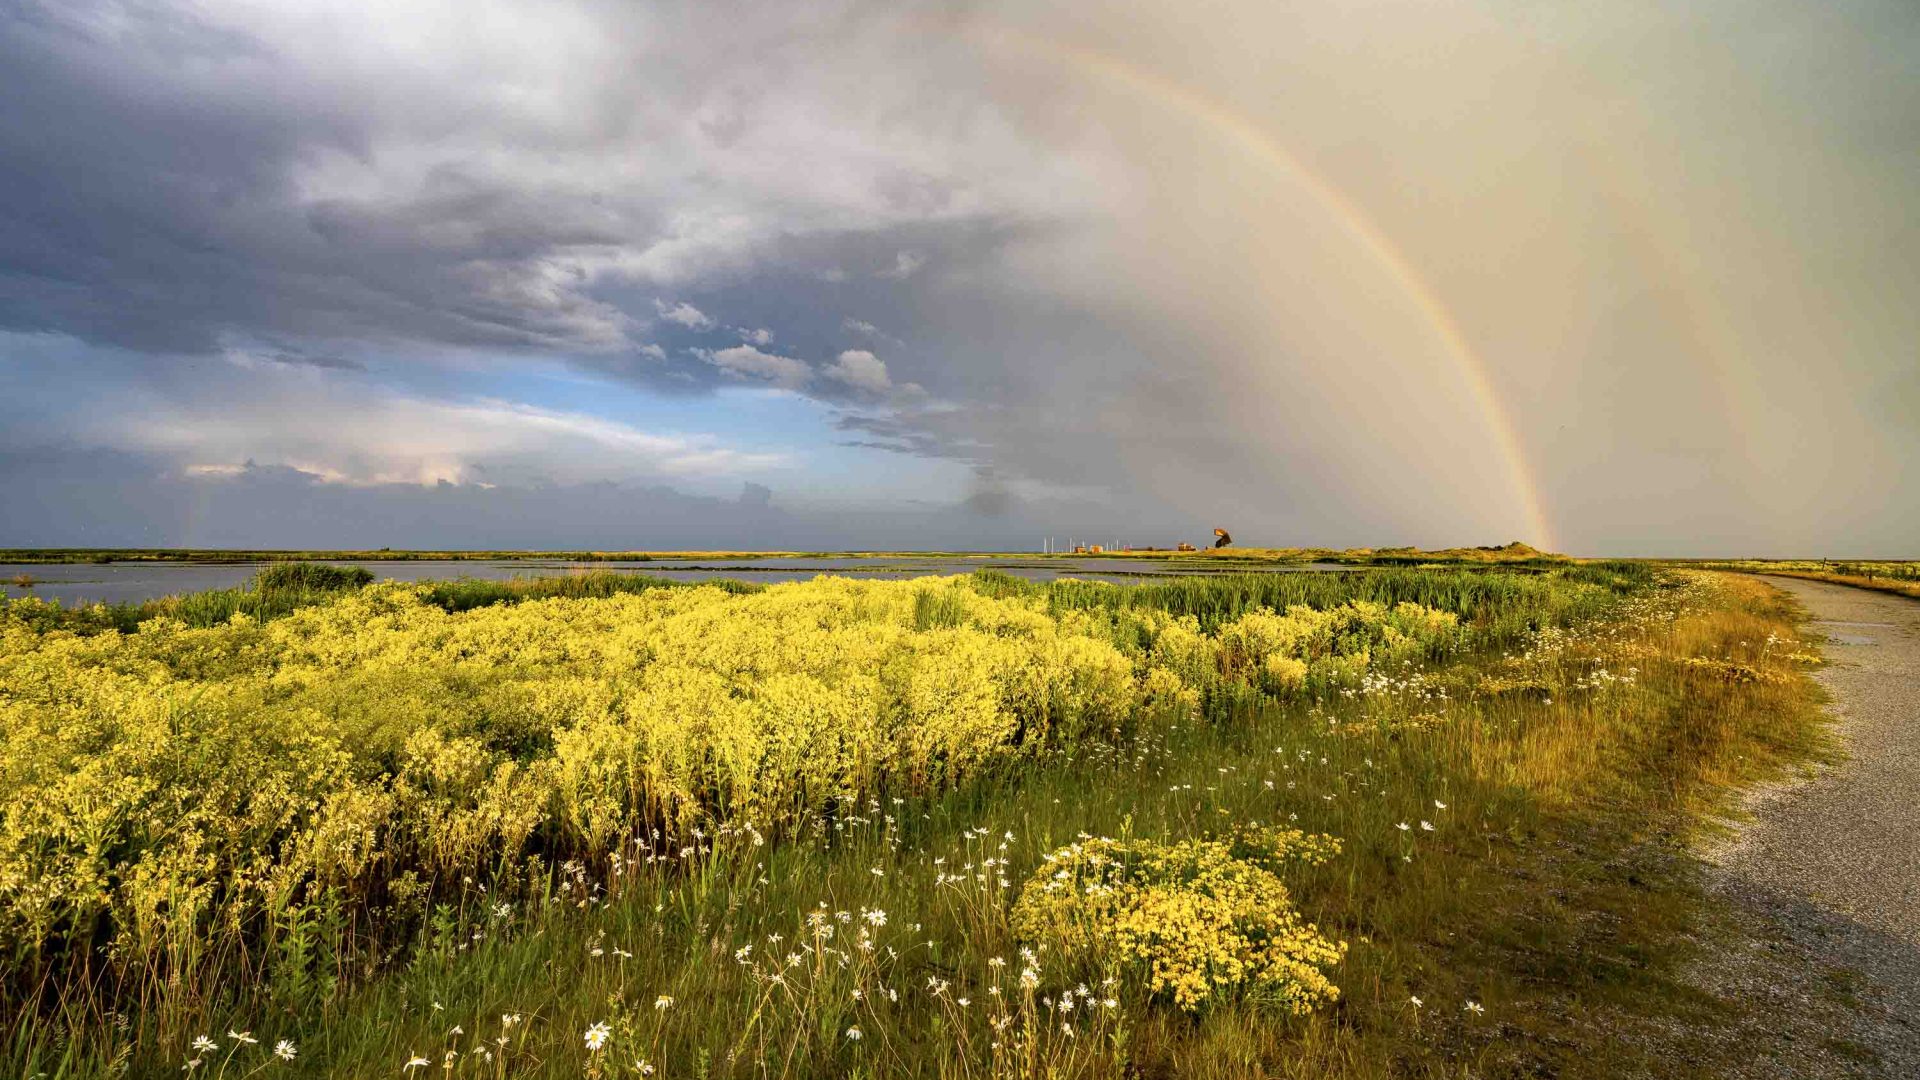 A rainbow in the sky above a field filled with yellow flowers.